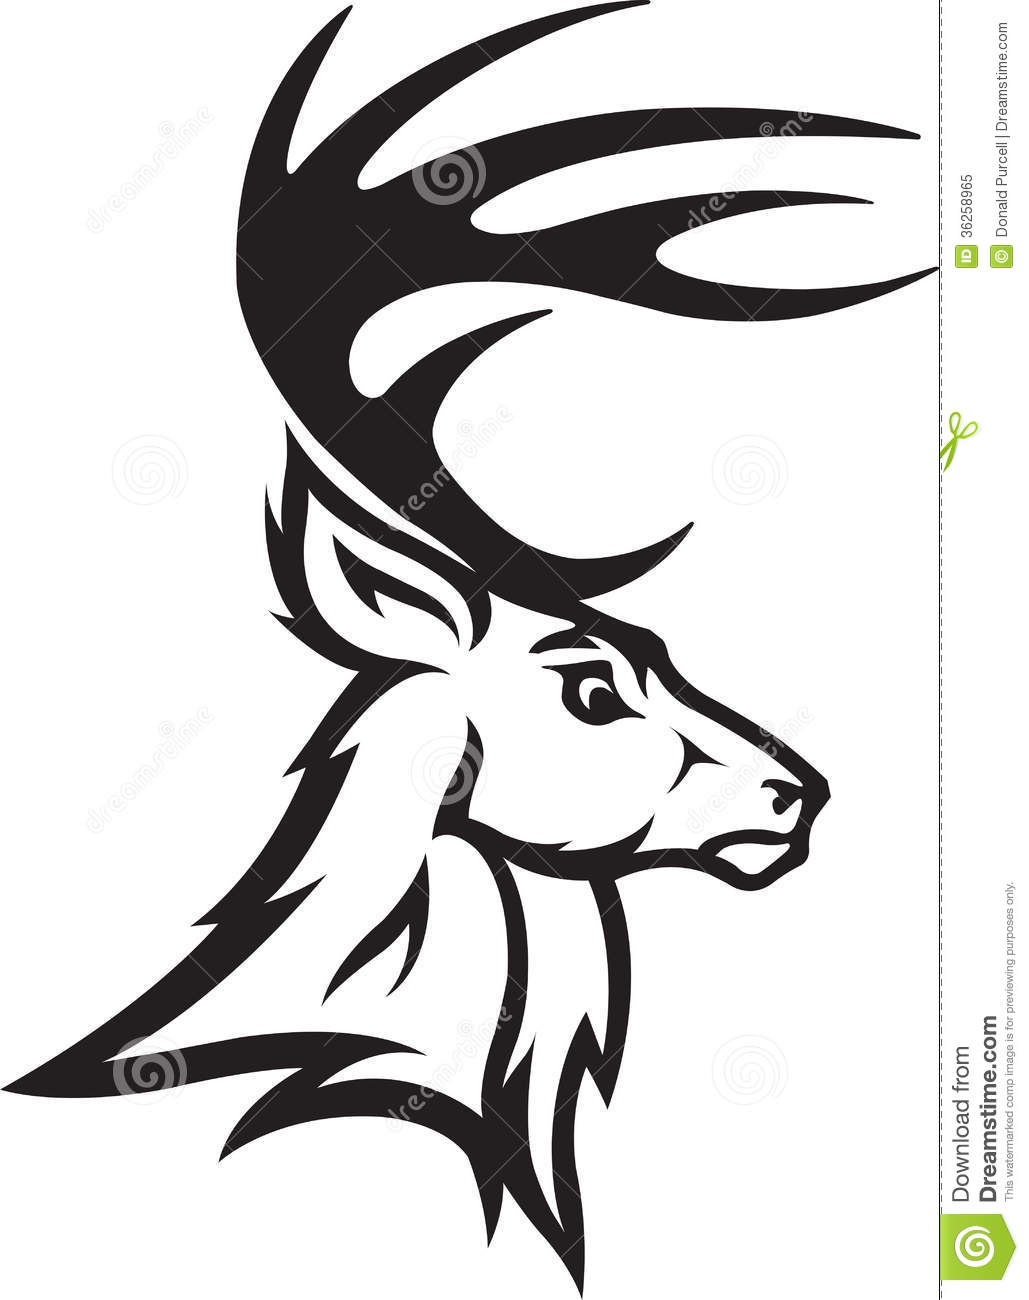 Deer Clip Art Black And White   Clipart Panda   Free Clipart Images